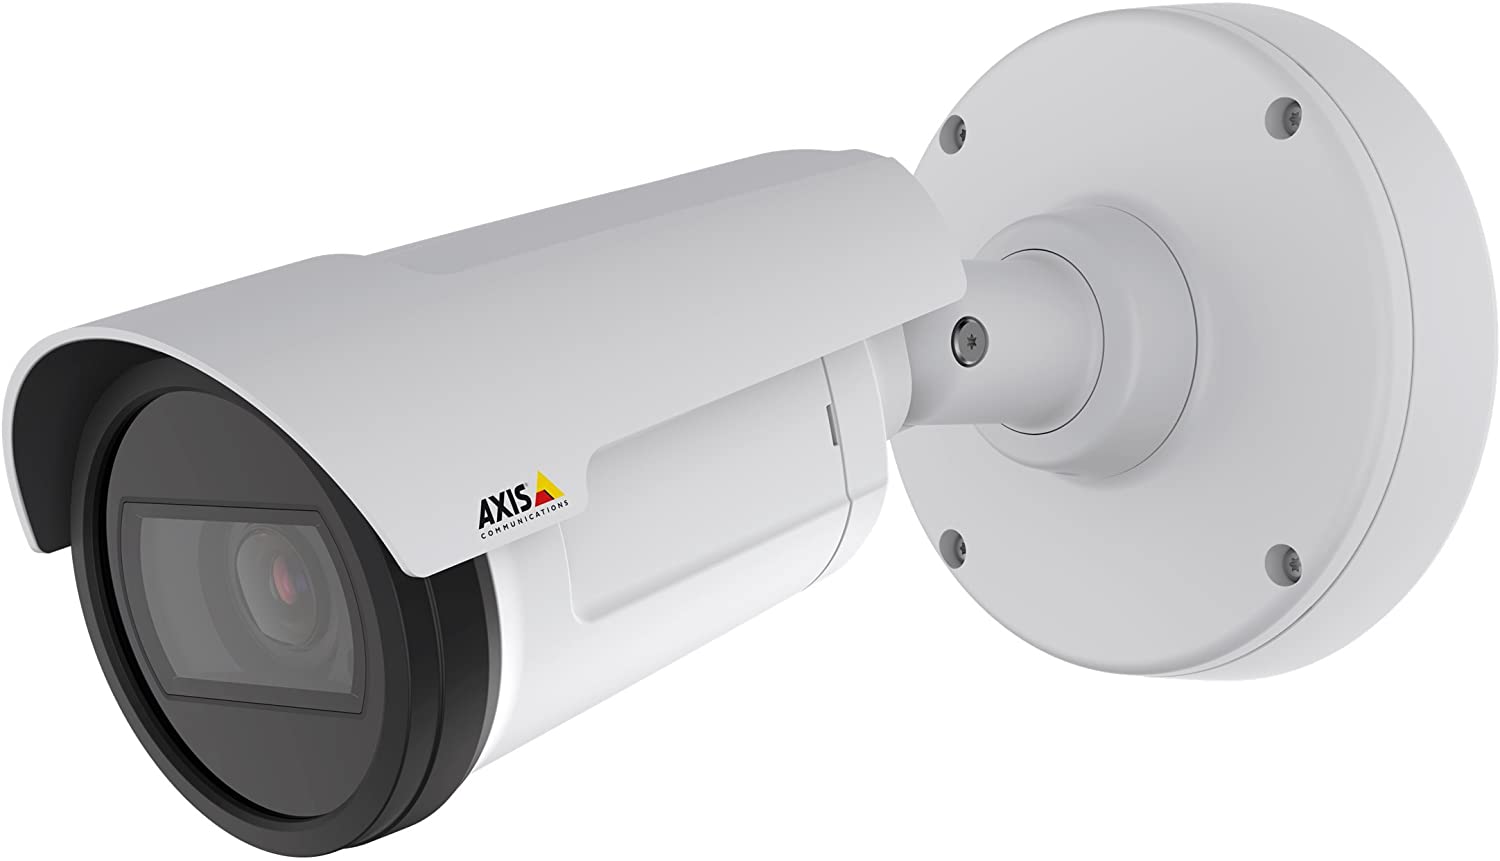 axis camera video